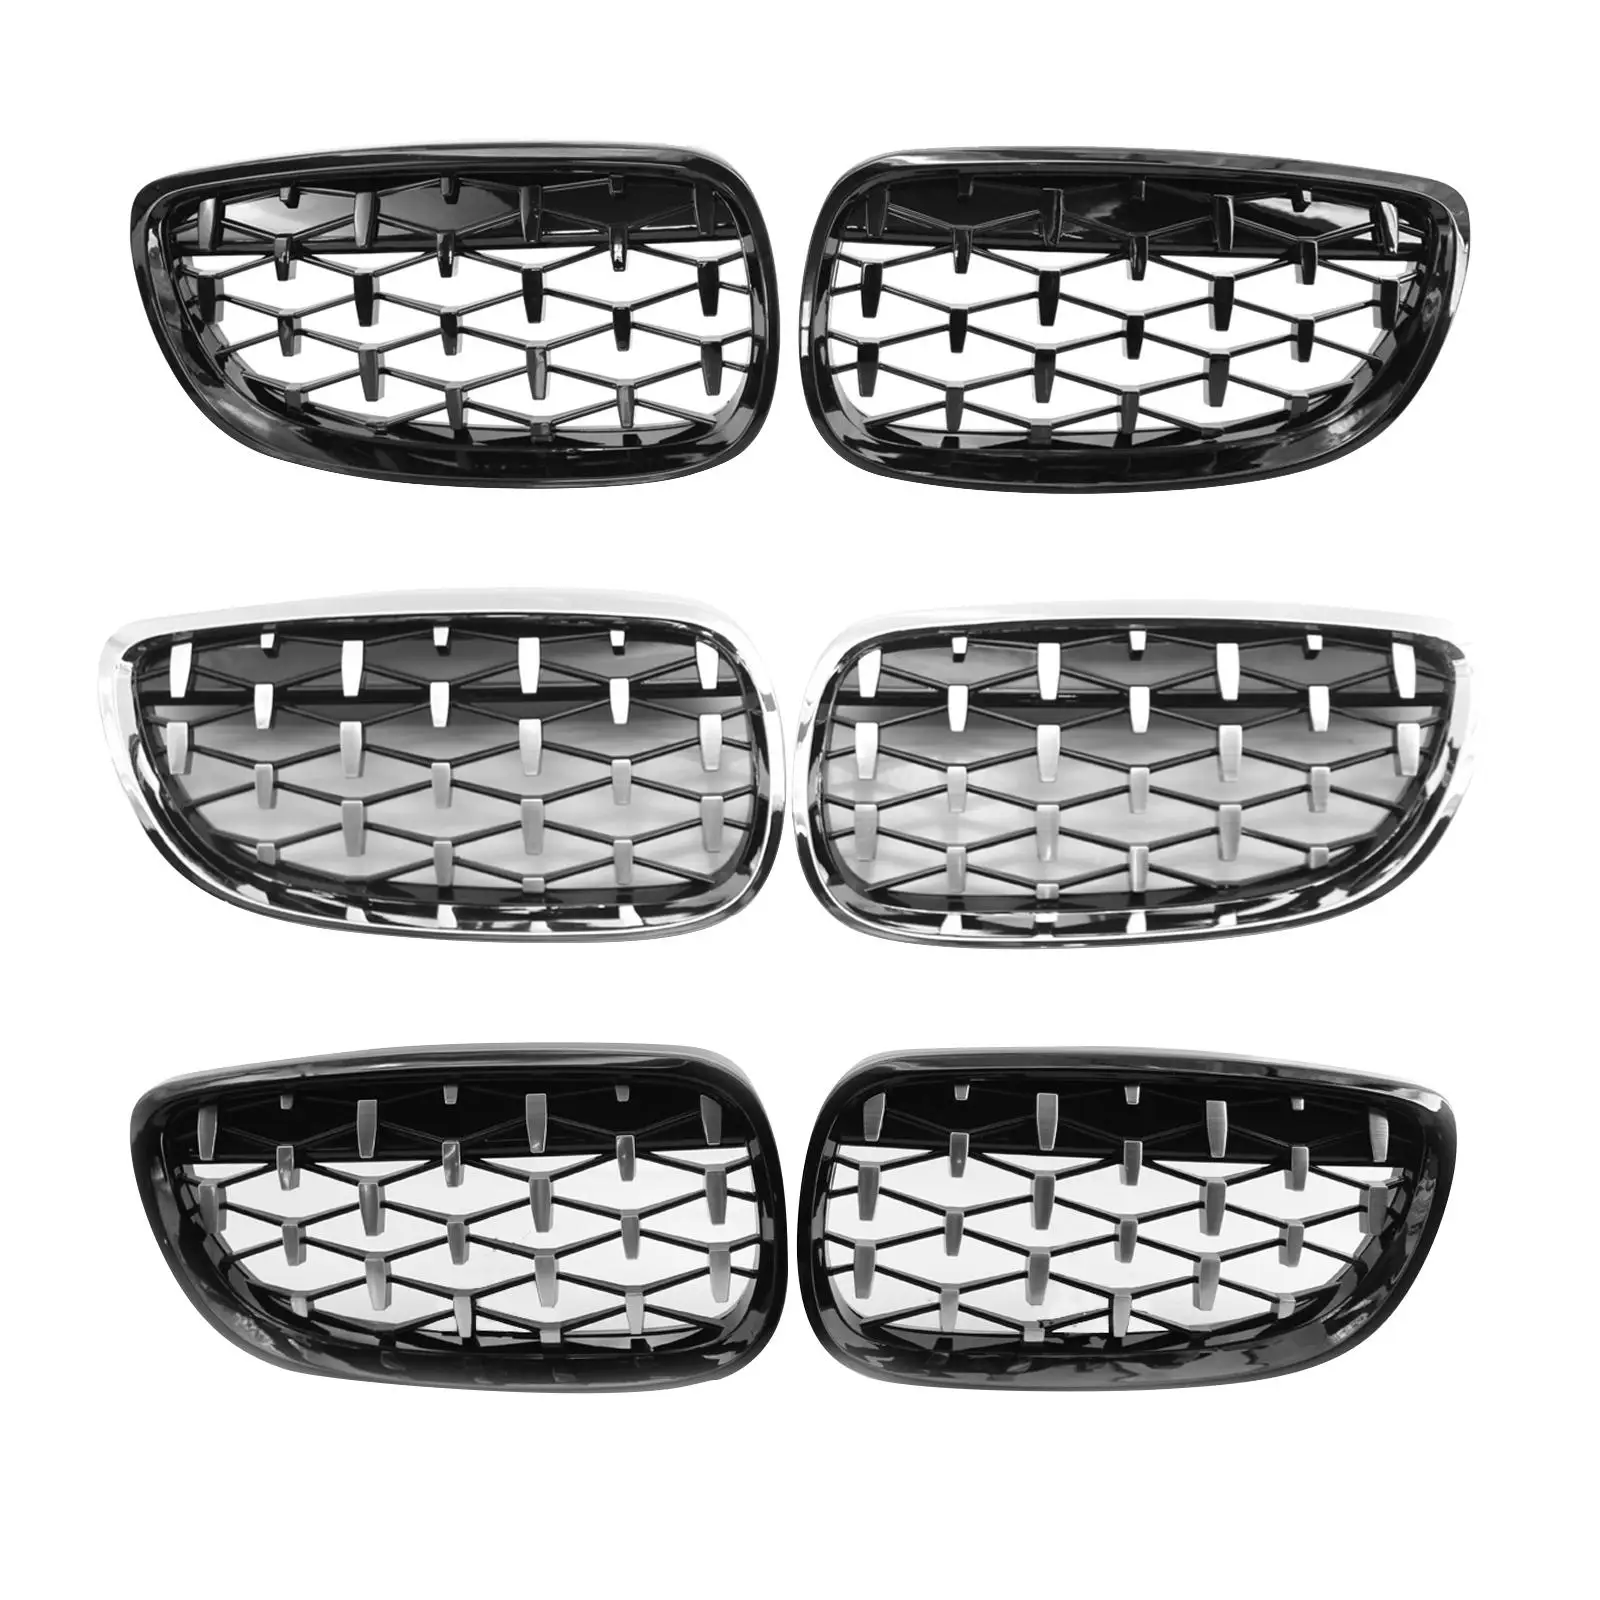 2 Pieces Automotive Front Hood Kidney Grille Grill 51137157277 Left Right for BMW E92 E93 Easy Installation Accessory